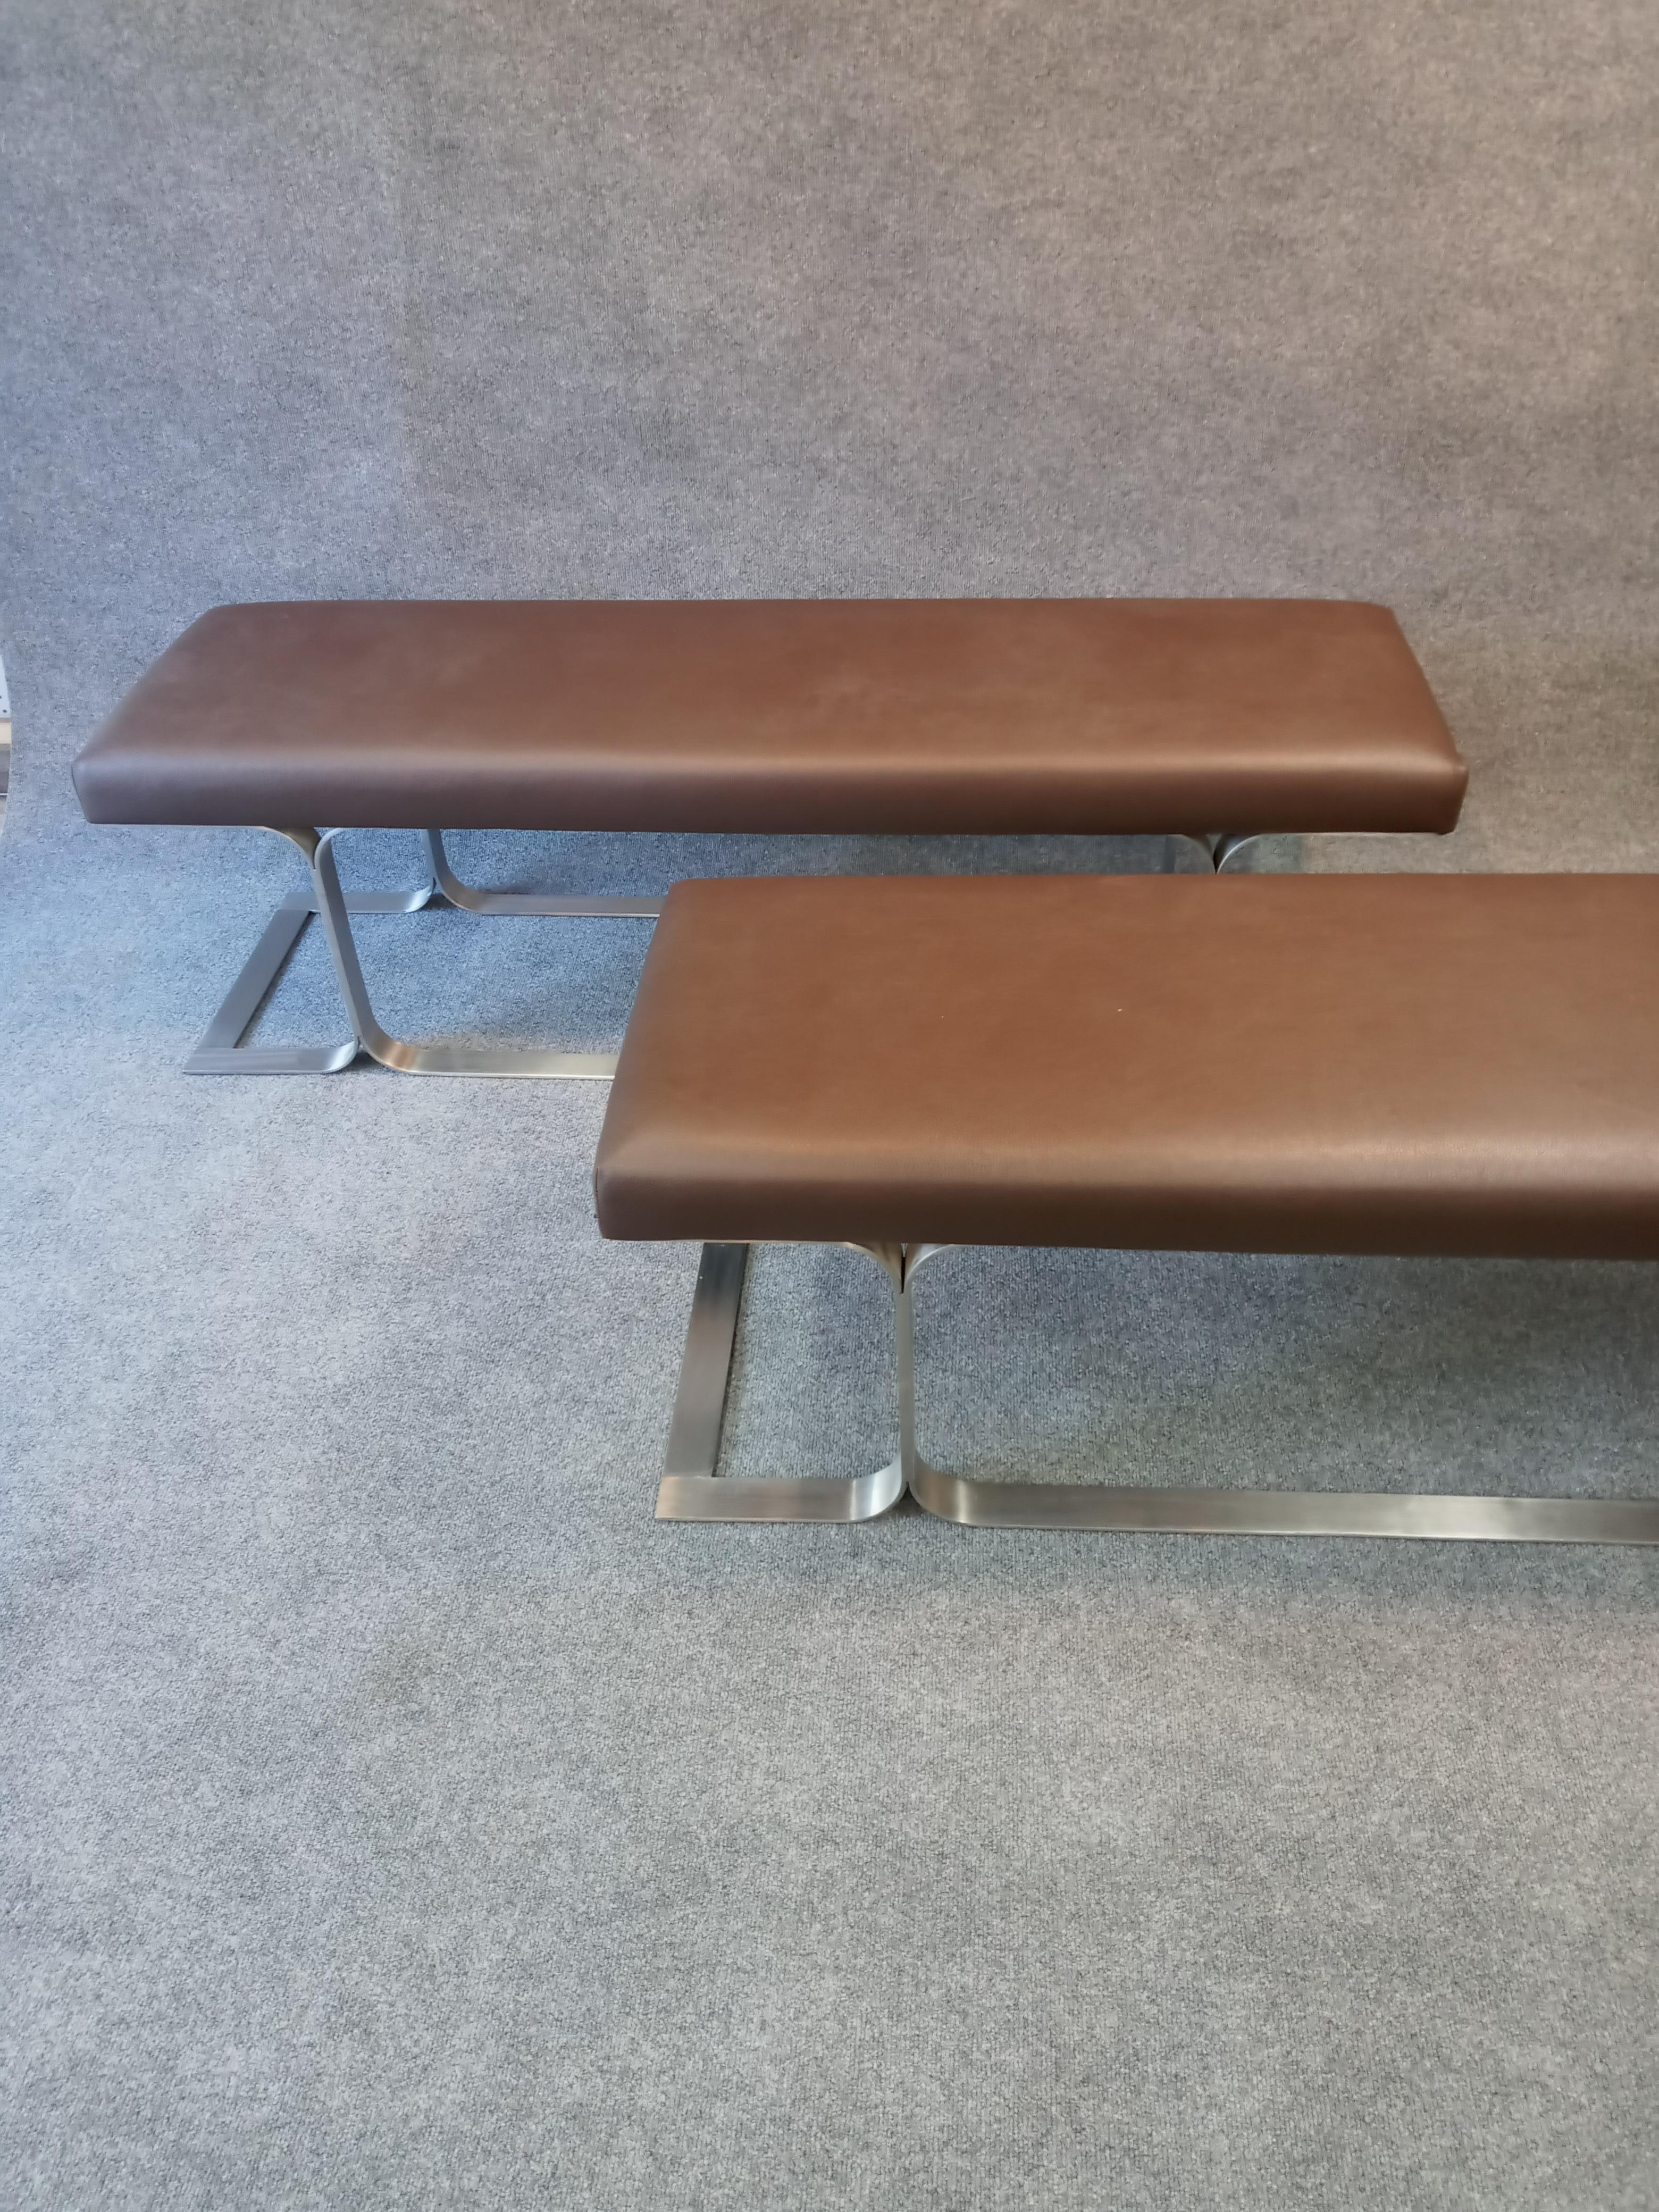 American Leatherette Benches in the Style of Erwin and Estelle Laverne MCM Post-Modern